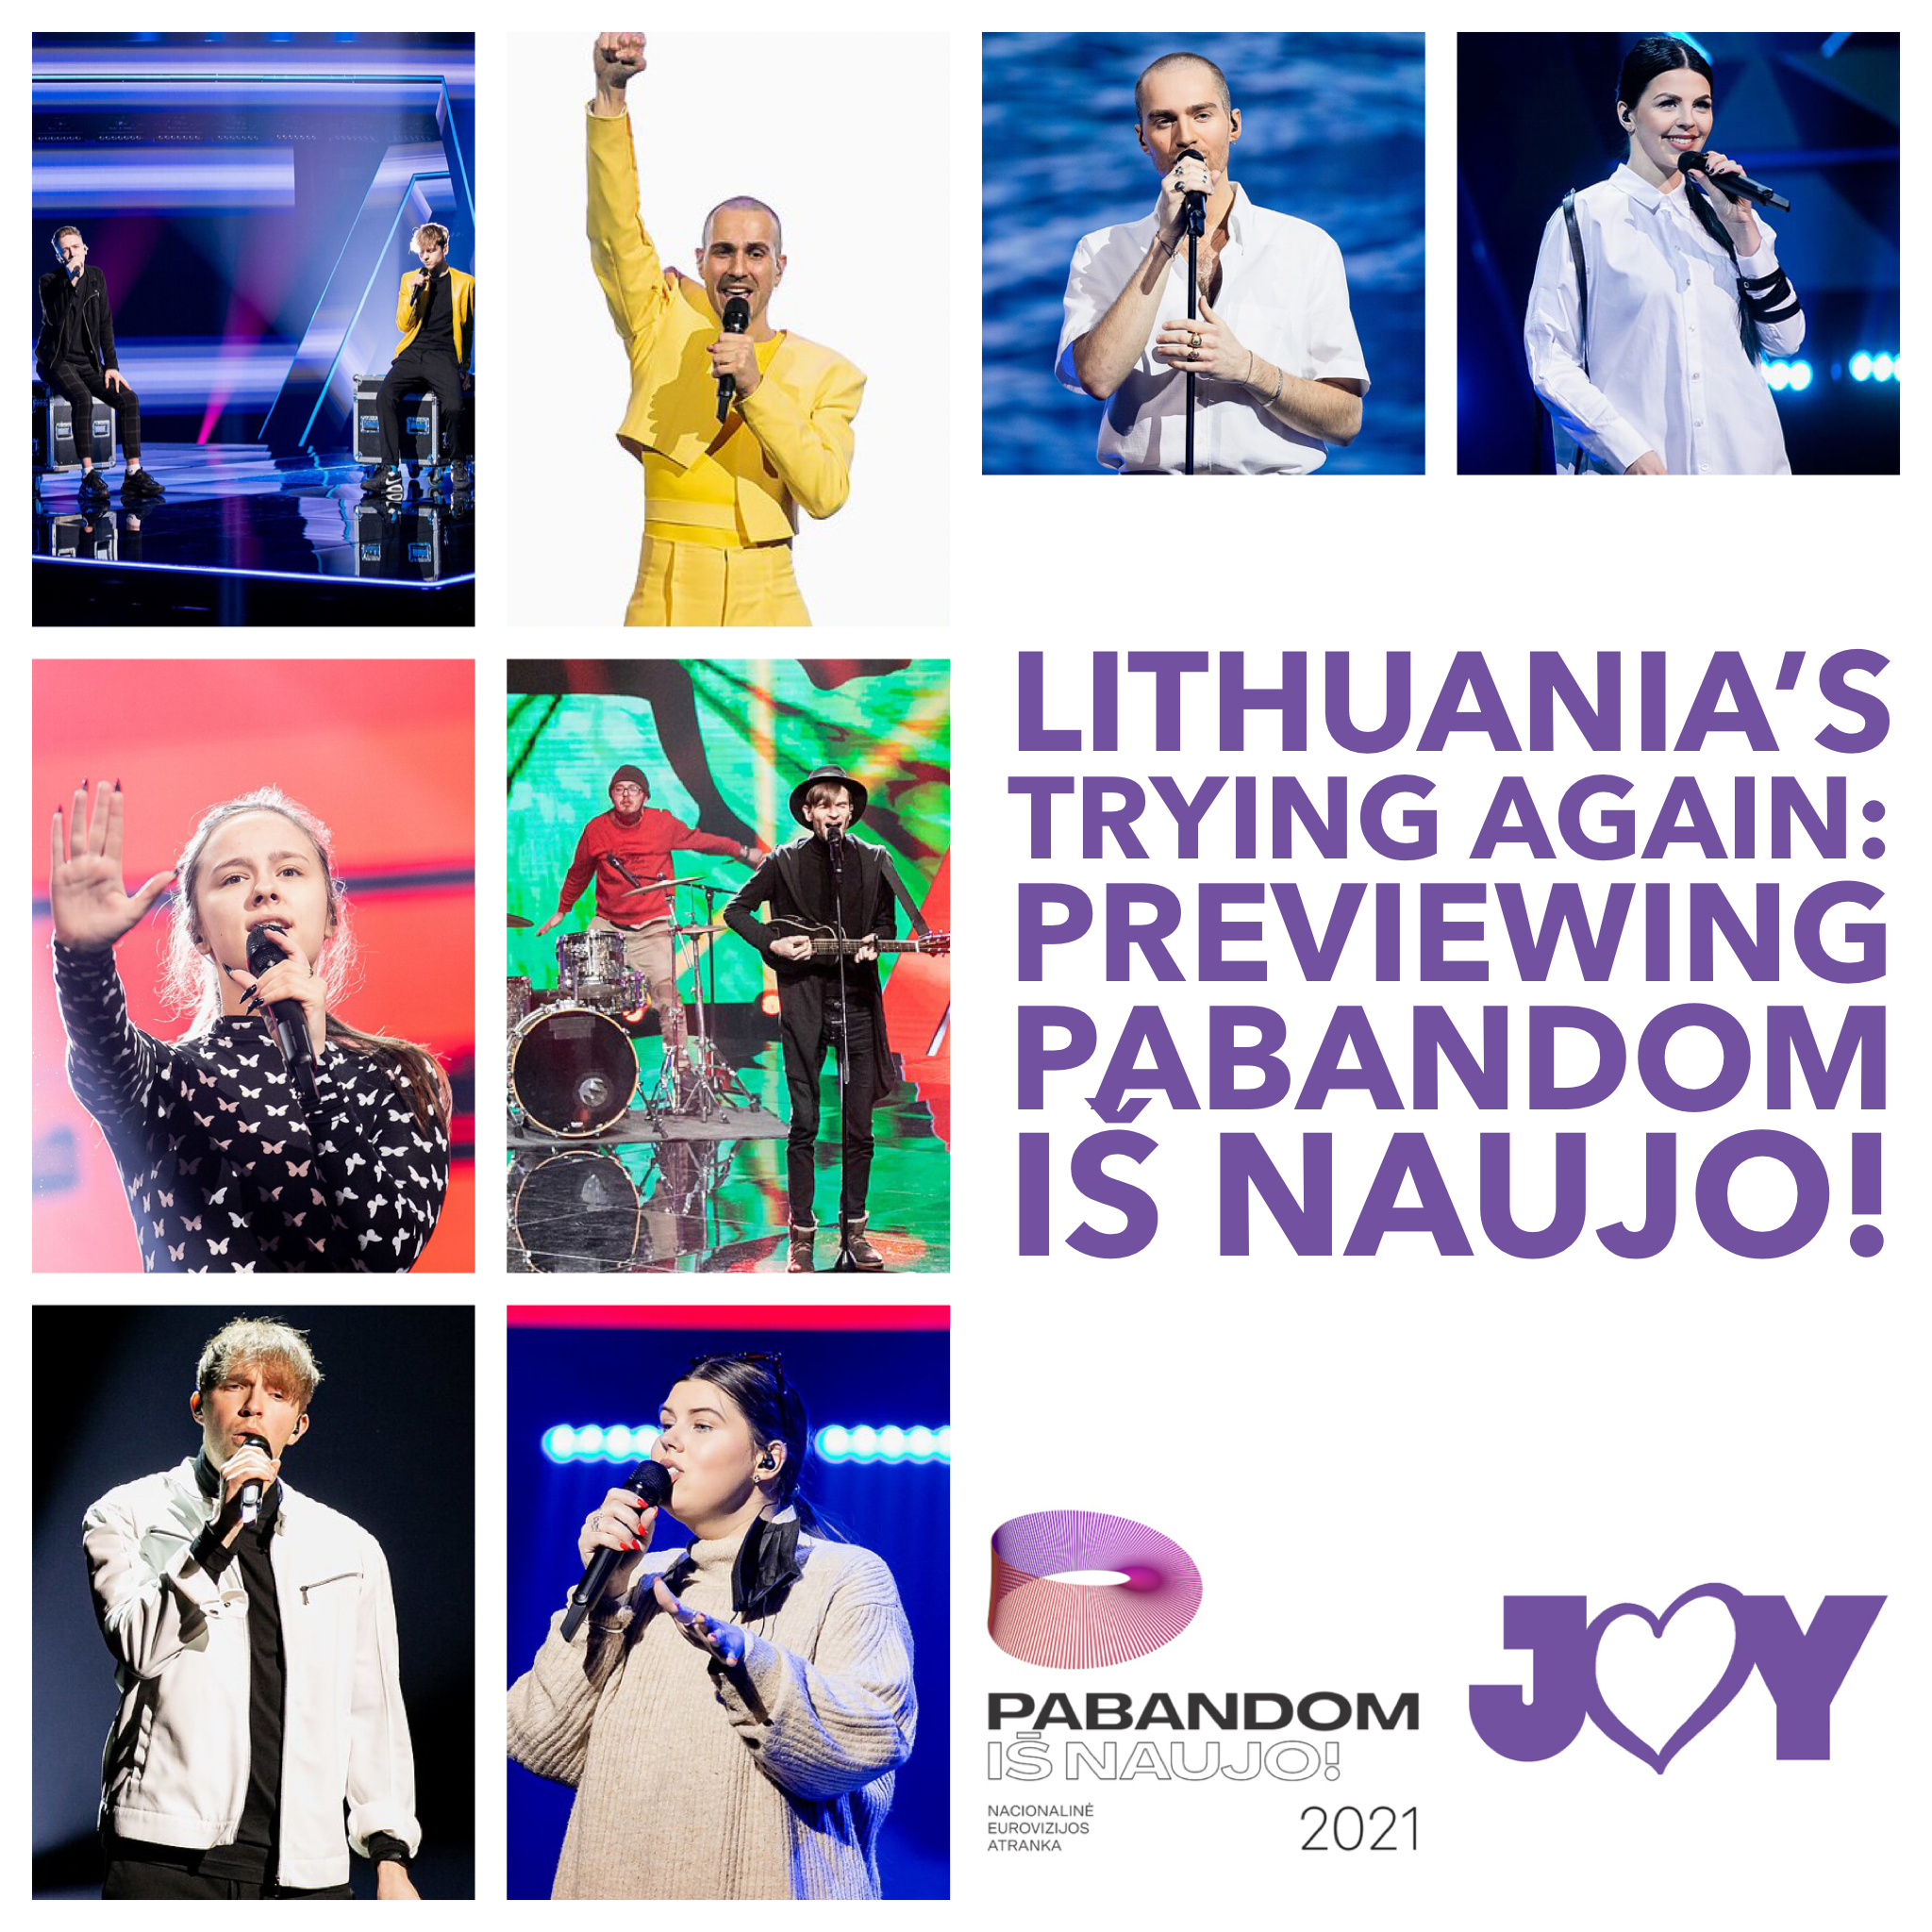 🇱🇹 Lithuania’s trying again: Previewing Pabandom iš Naujo! 2021